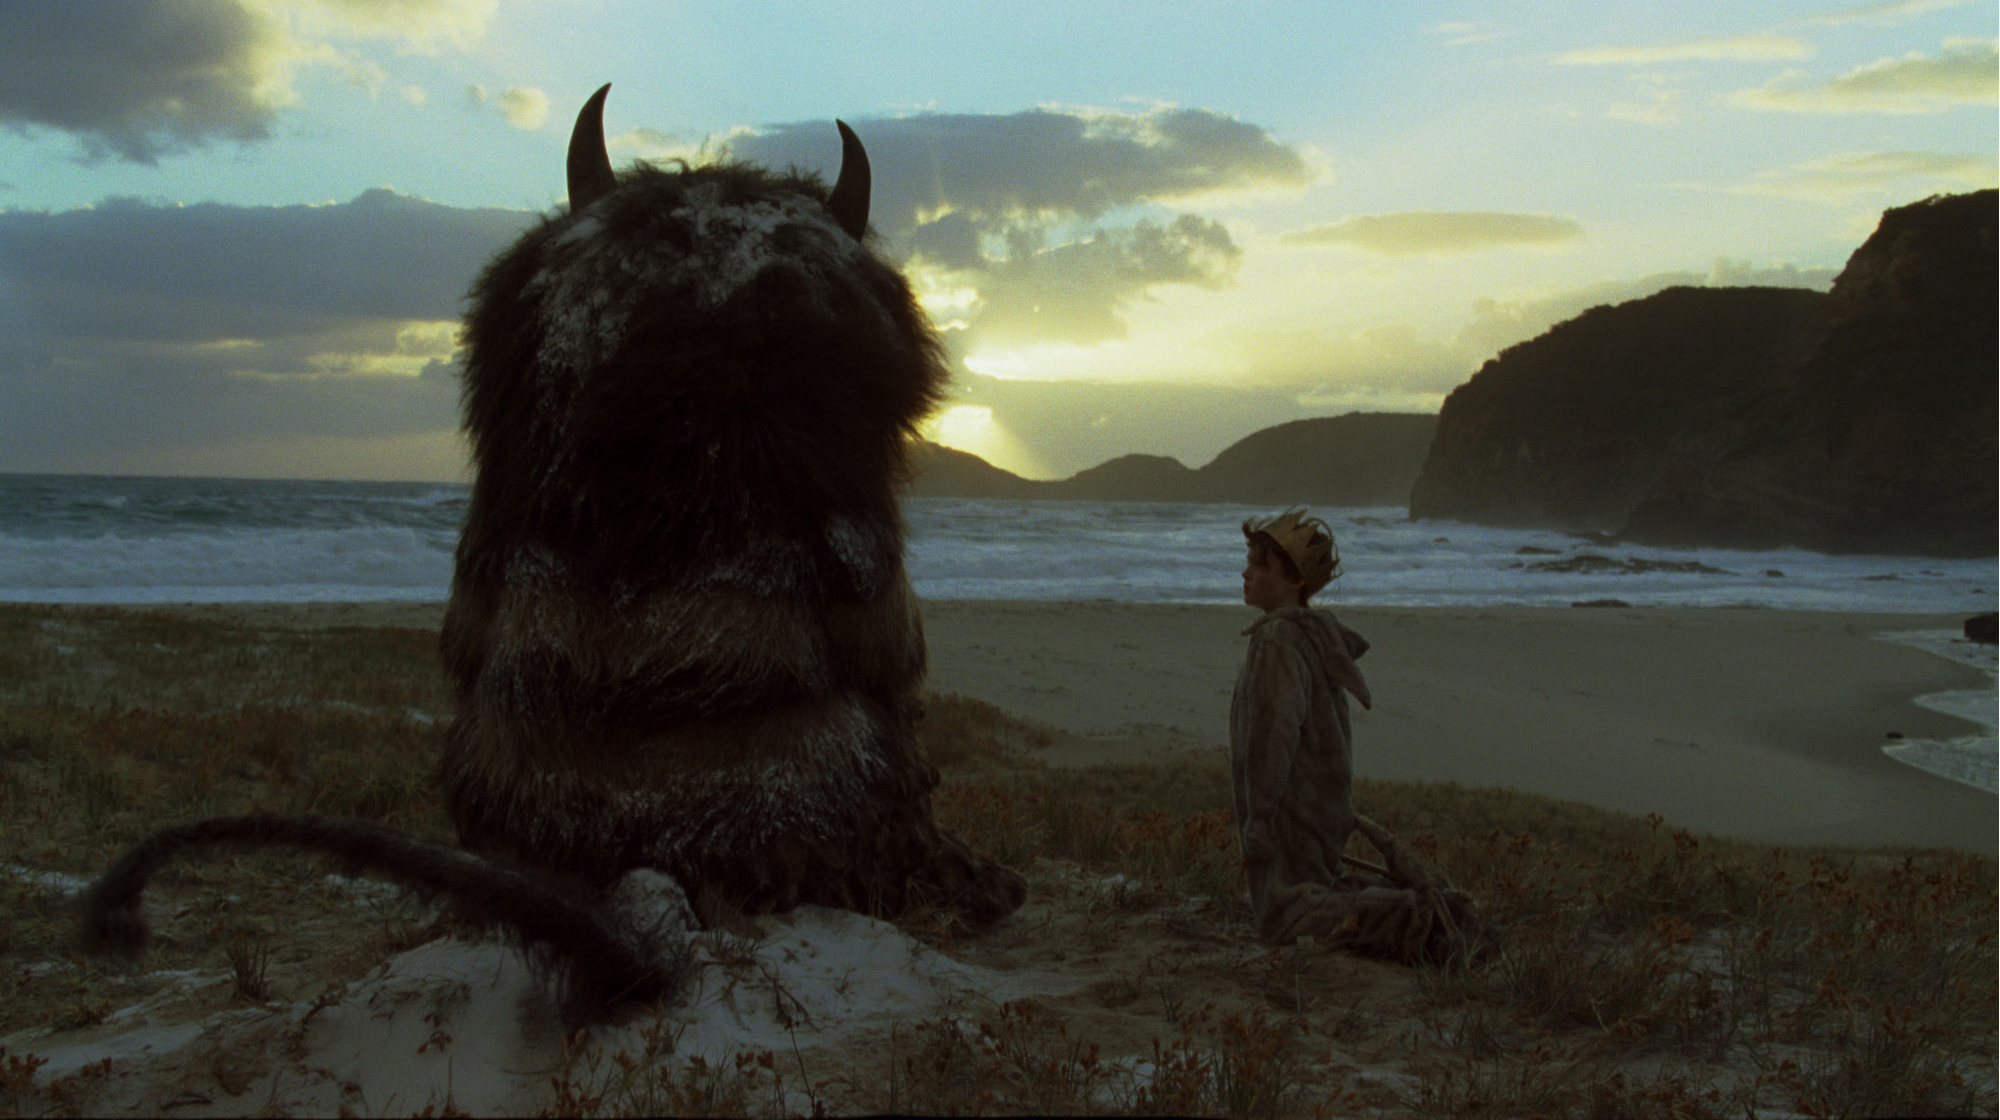 Where the Wild things are 2009